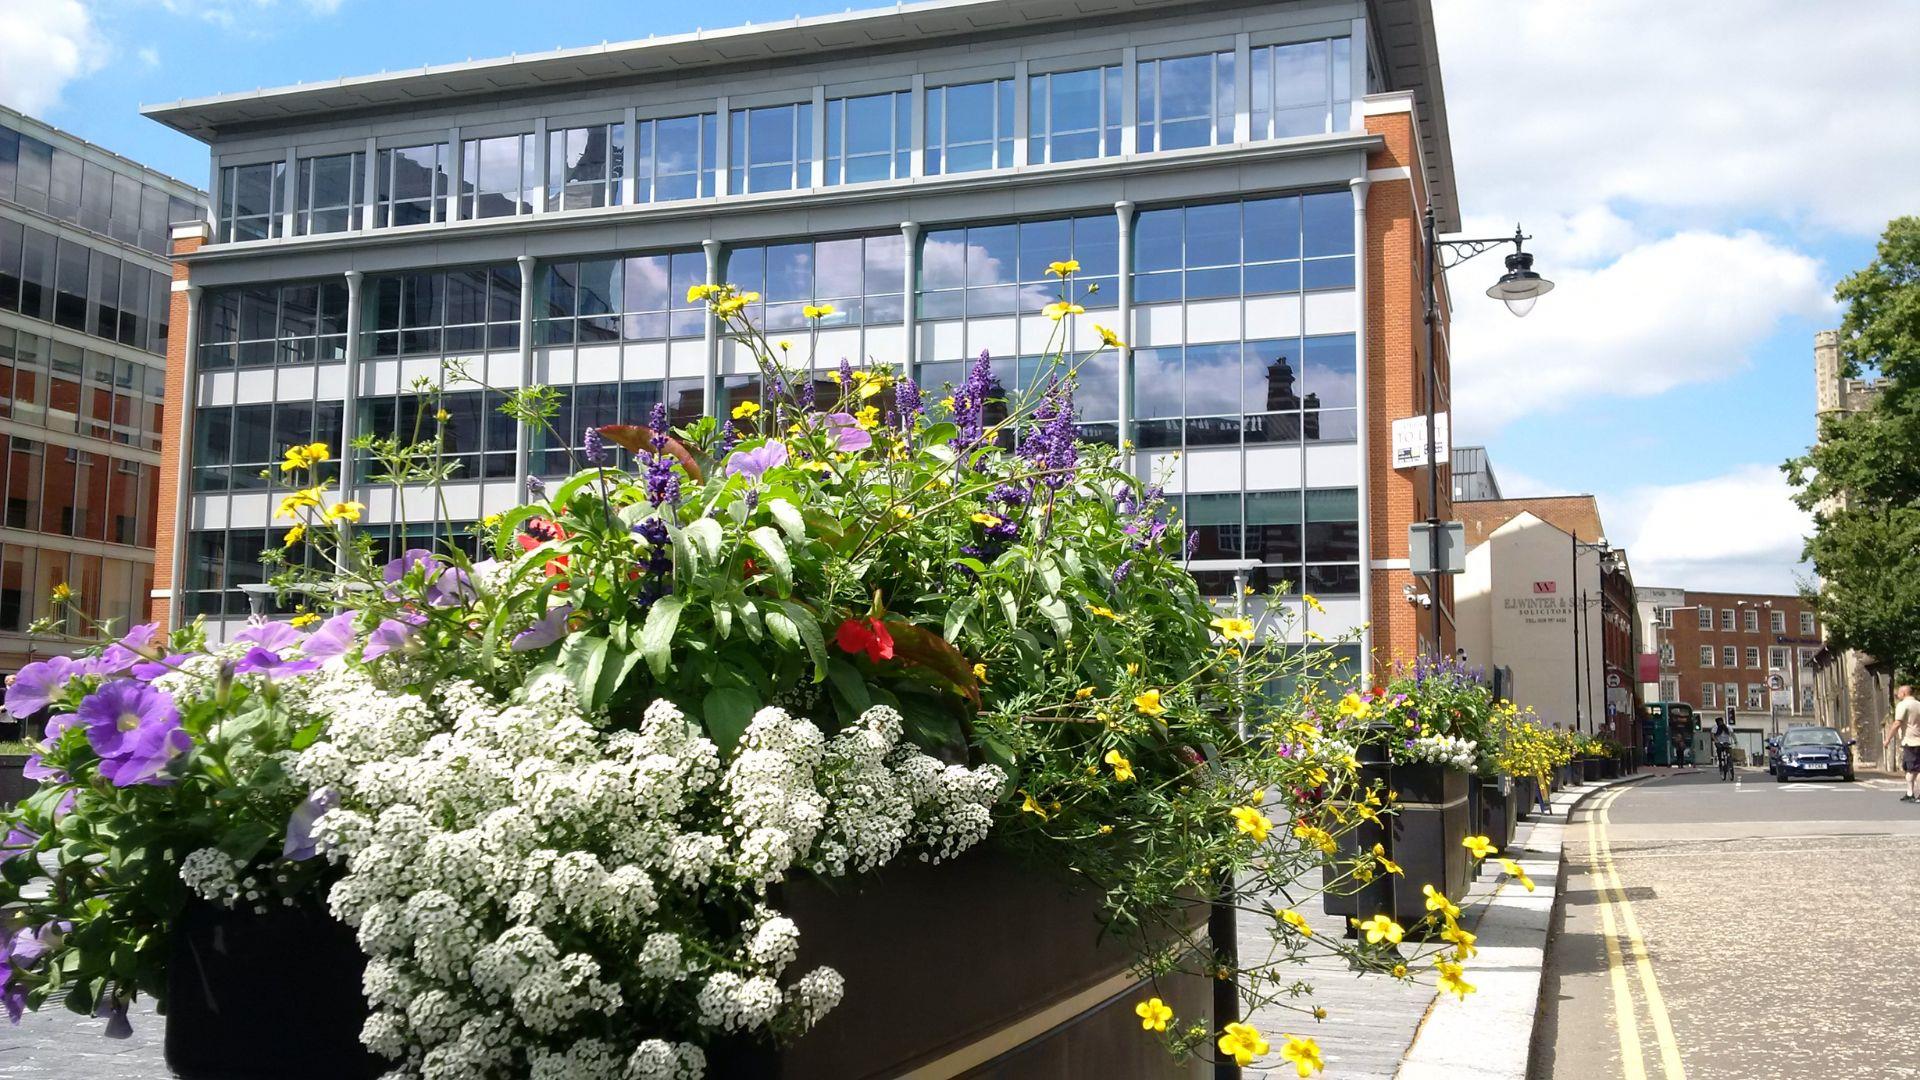 Floral display by Forbury Gardens in Reading's Abbey Quarter district